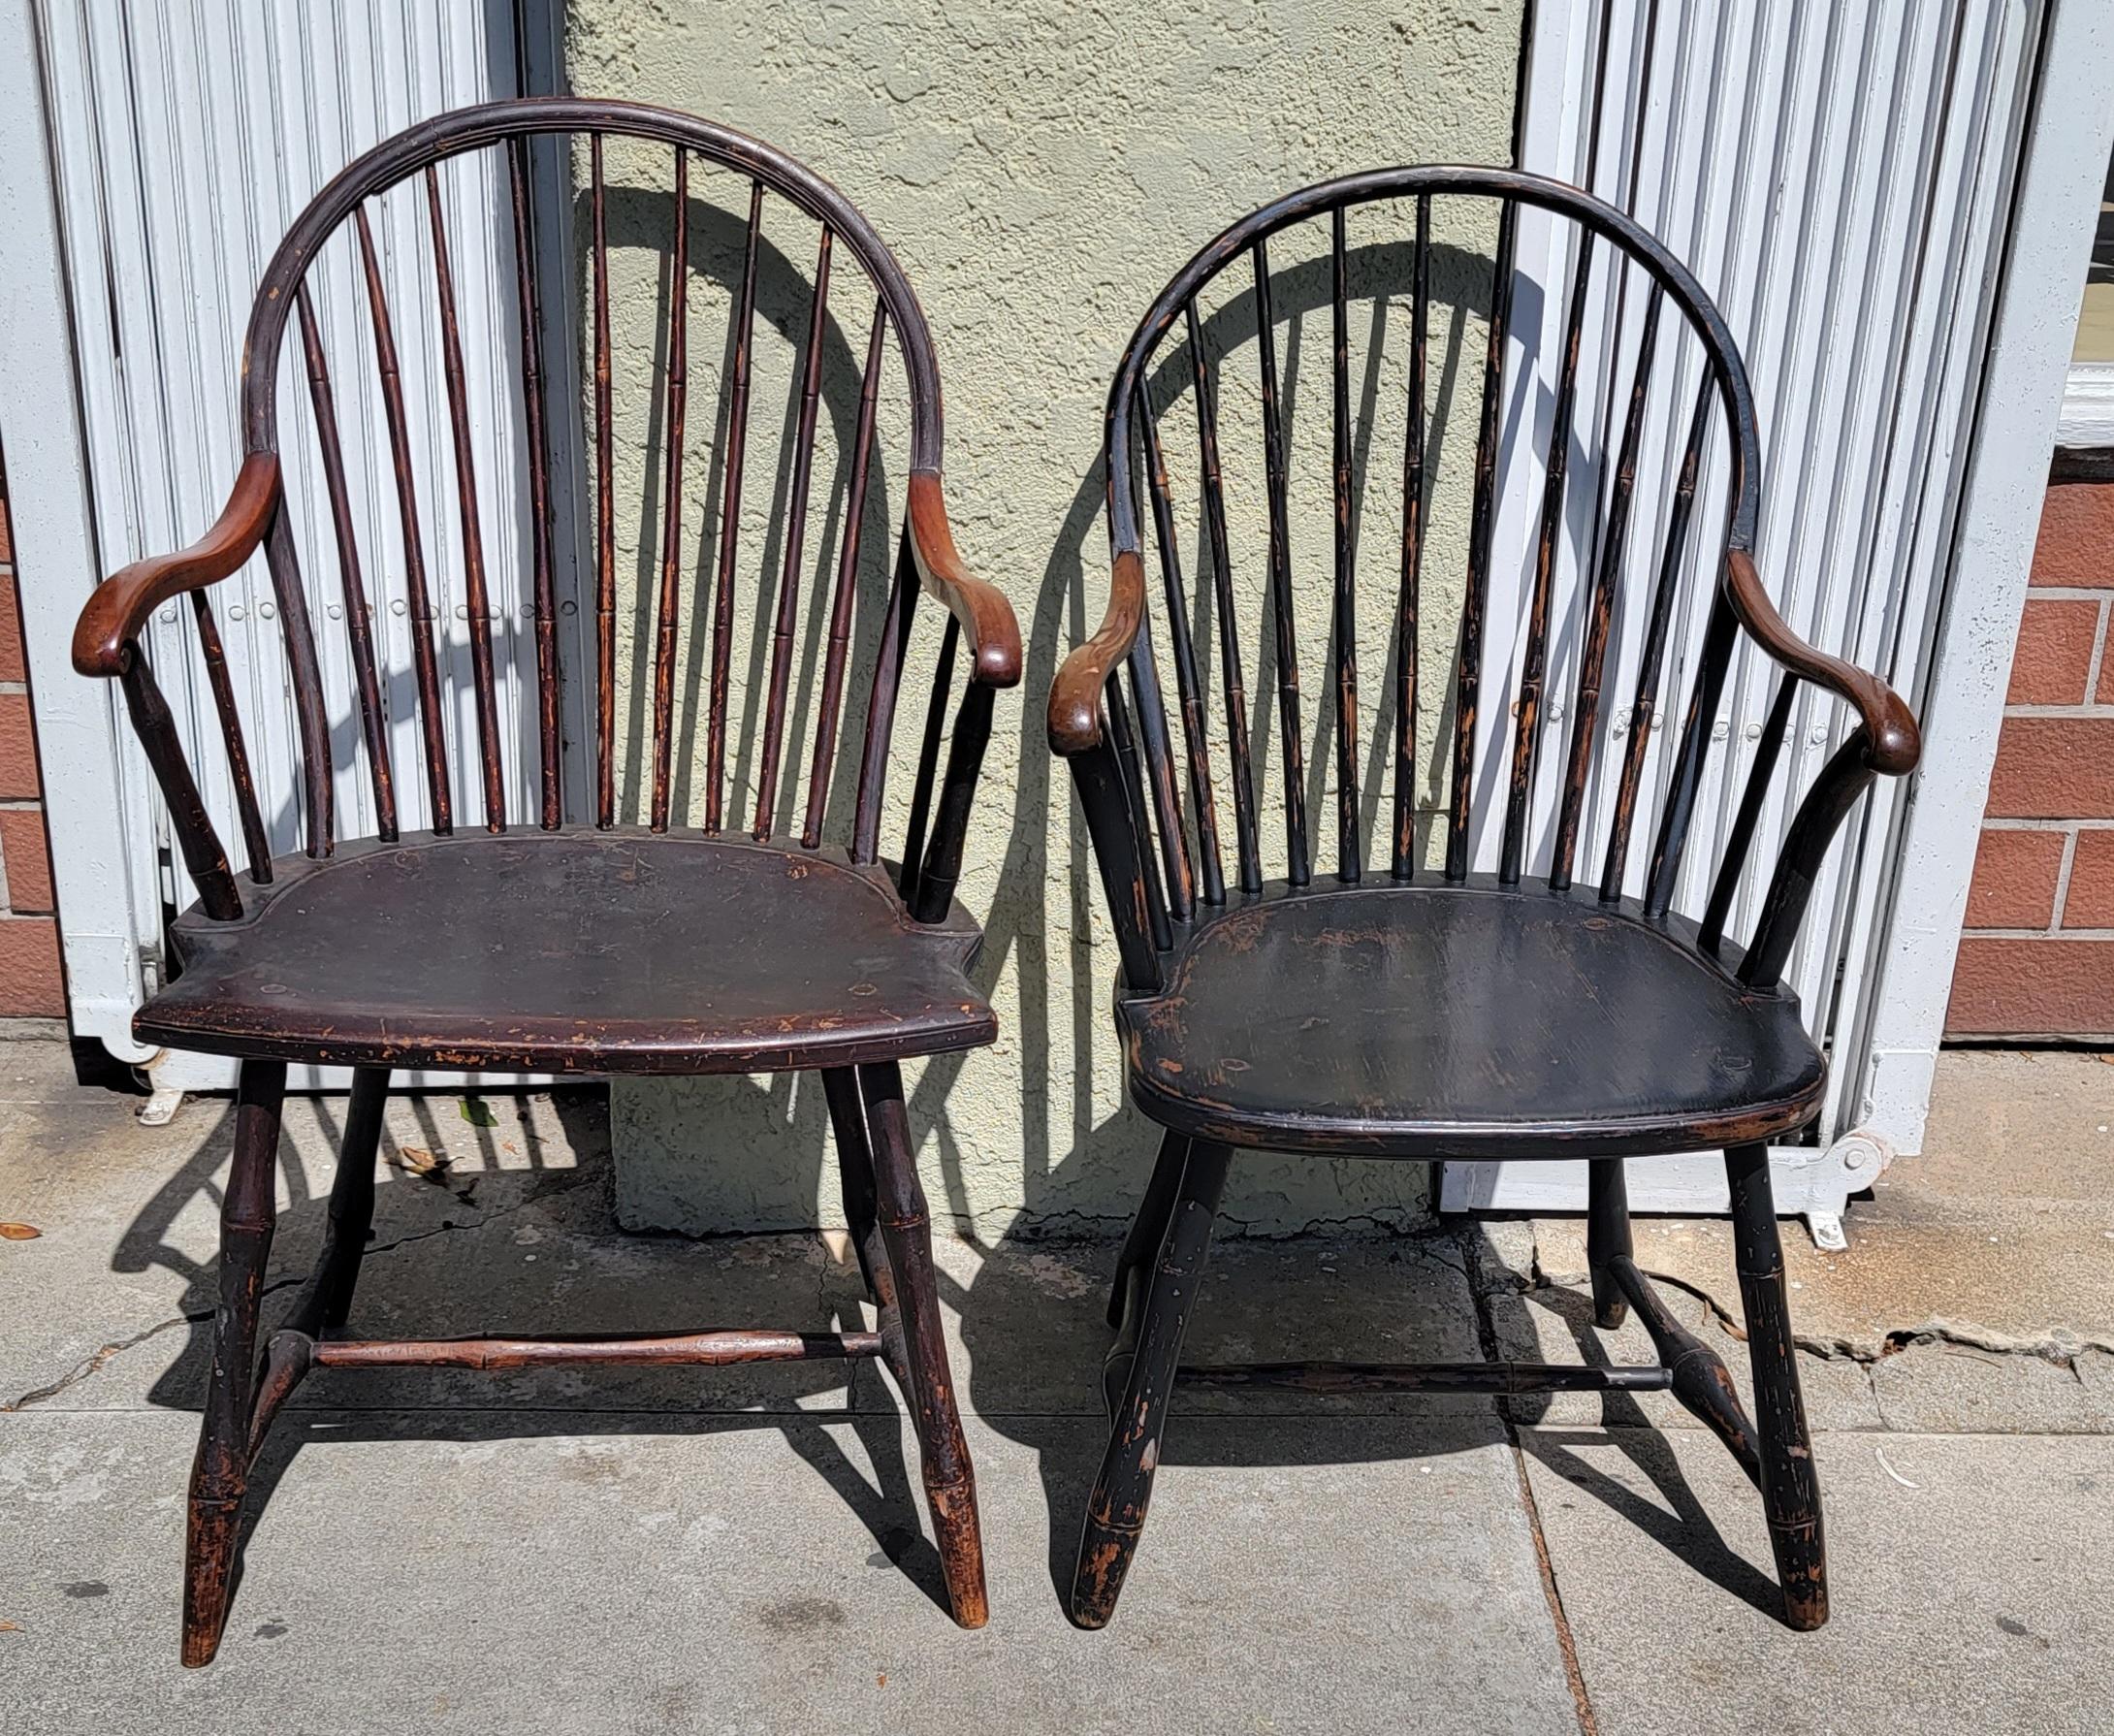 American Classical 19th C Extended Scroll Arm Windsor Arm Chairs. Set of Four